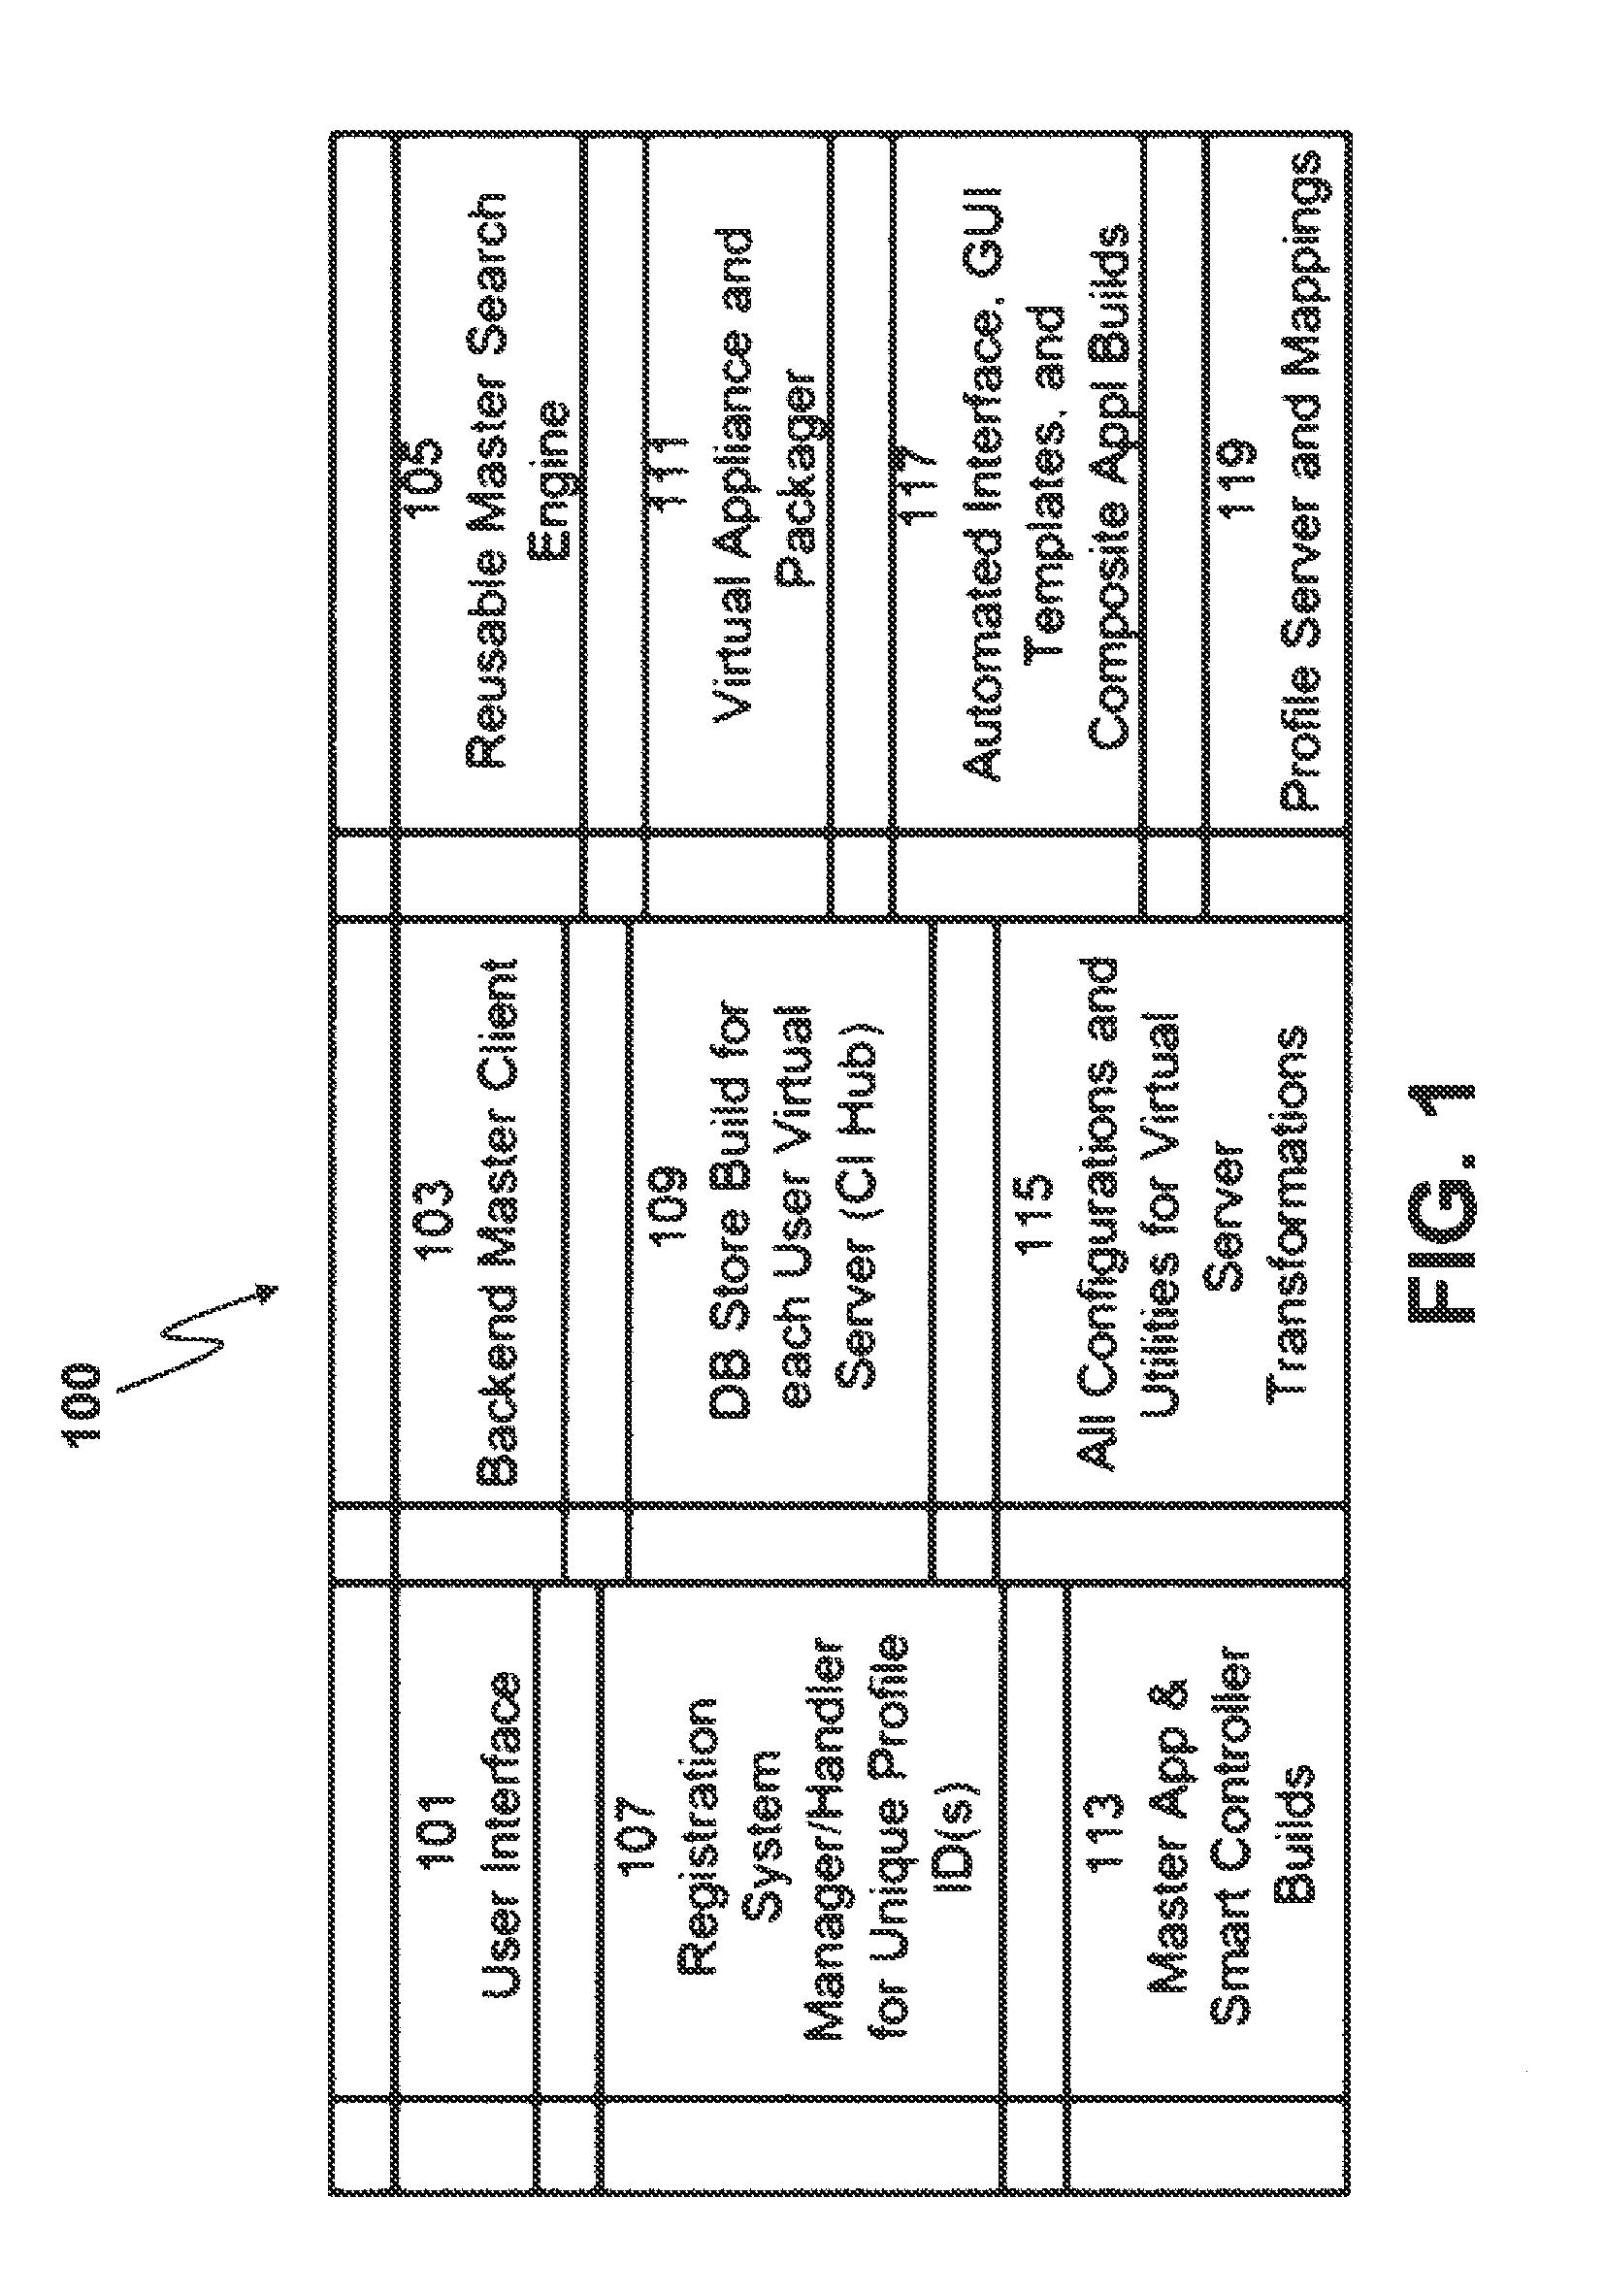 Distributed Hybrid Virtual Media and Data Communication System